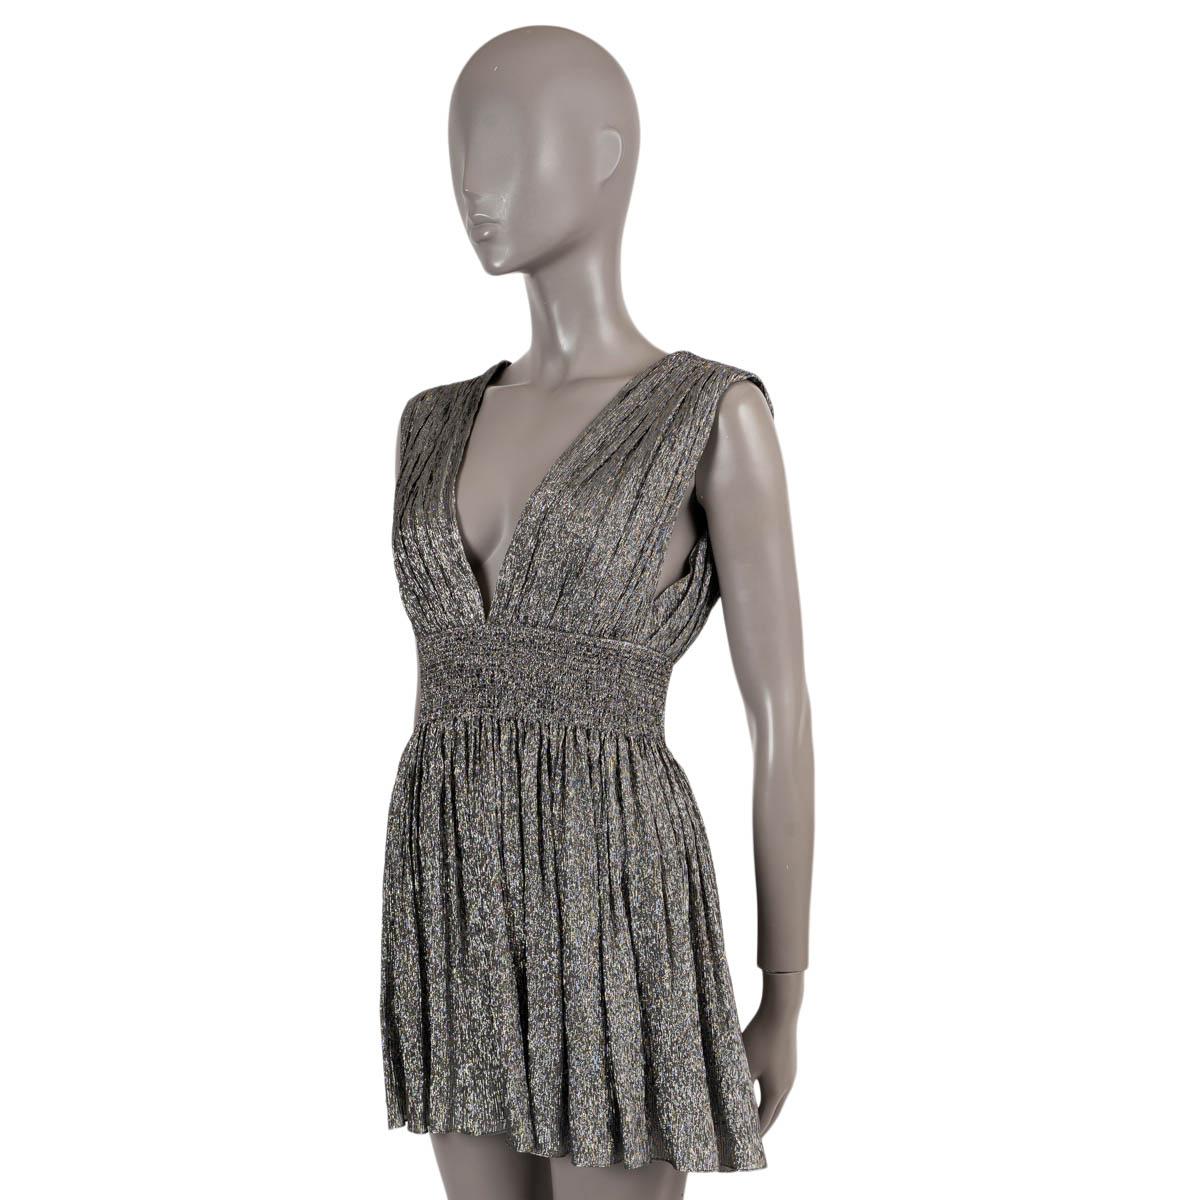 100% authentic Saint Laurent sleeveless mini cocktail dress in metallic silver jersey silk (with 22% metallic fiber). Features a plunging V-neck silhouette with a low-cut back and a smocked waistband and loosely ruffled mini skirt. Opens with a